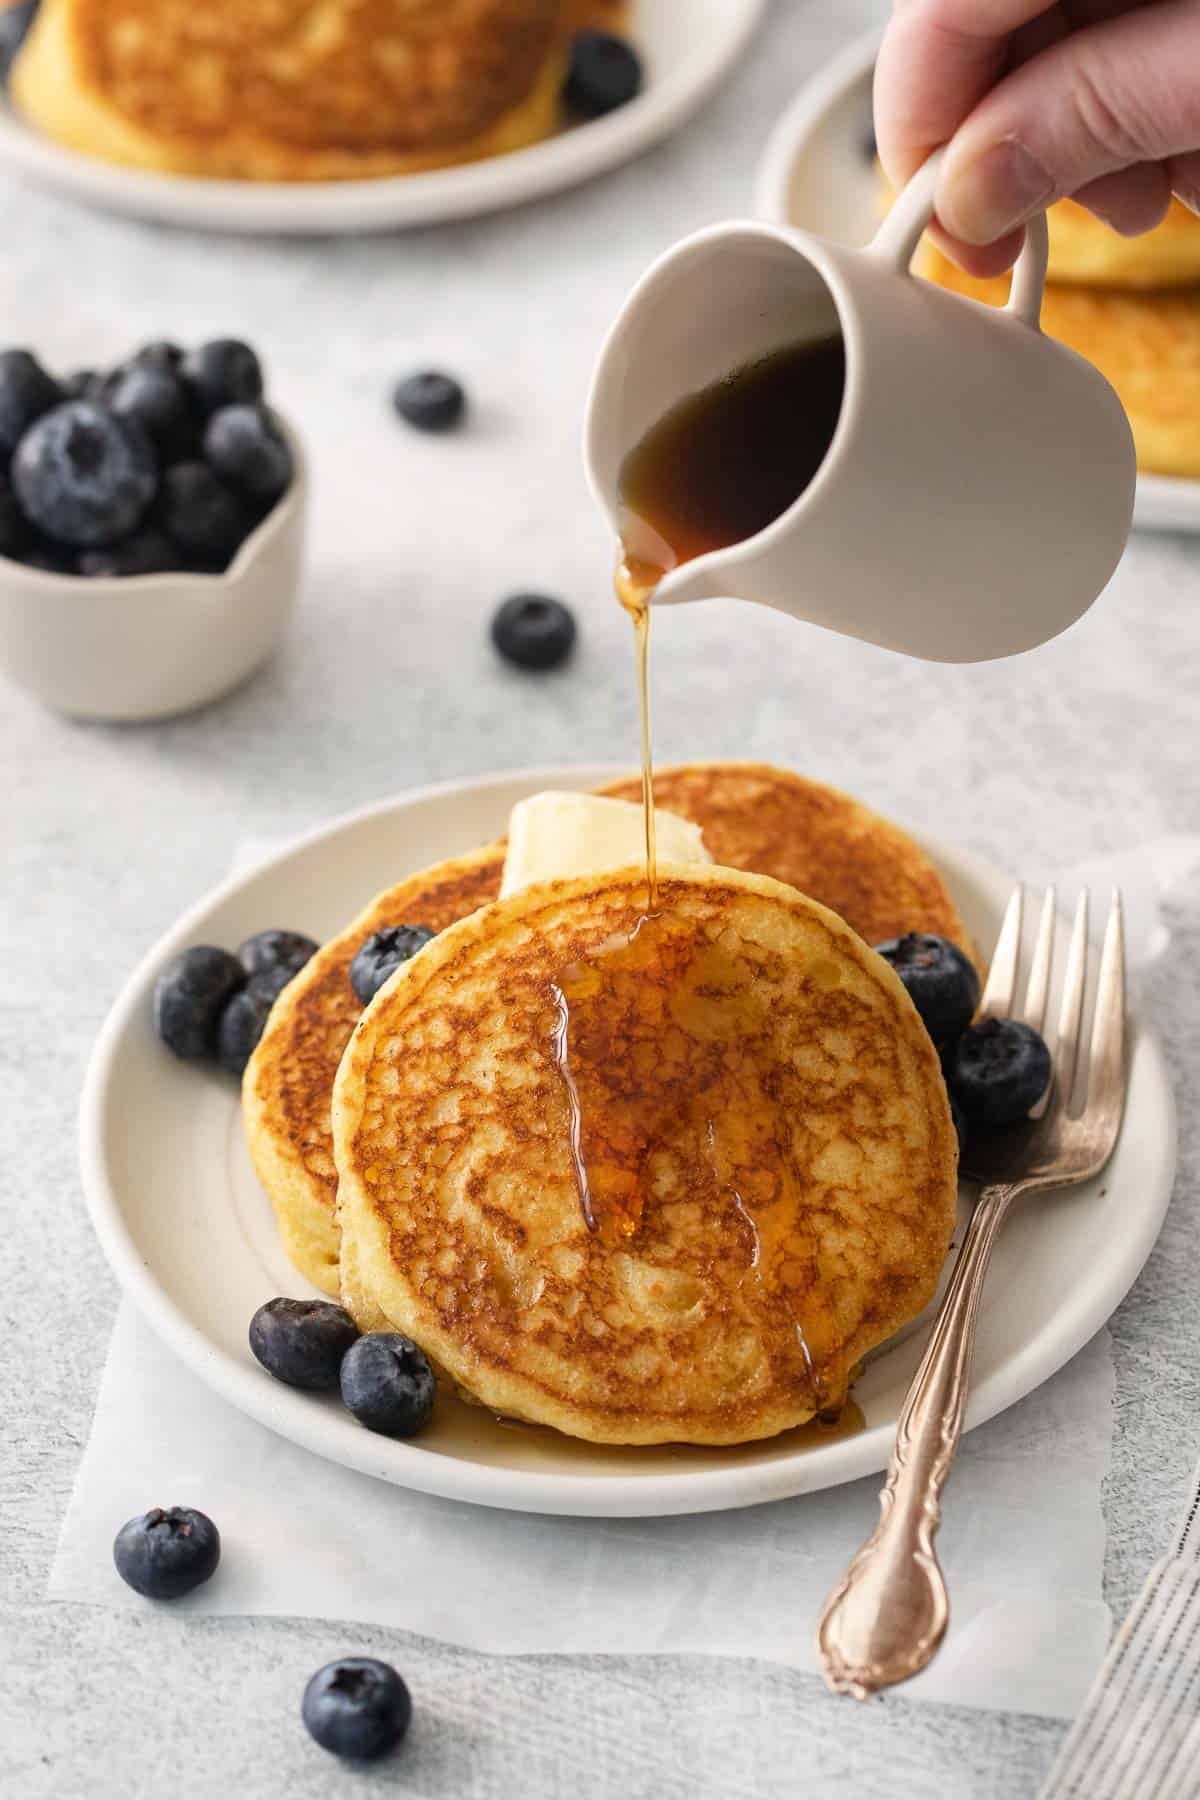 Cornmeal pancakes on a plate and a hand pouring syrup over the top